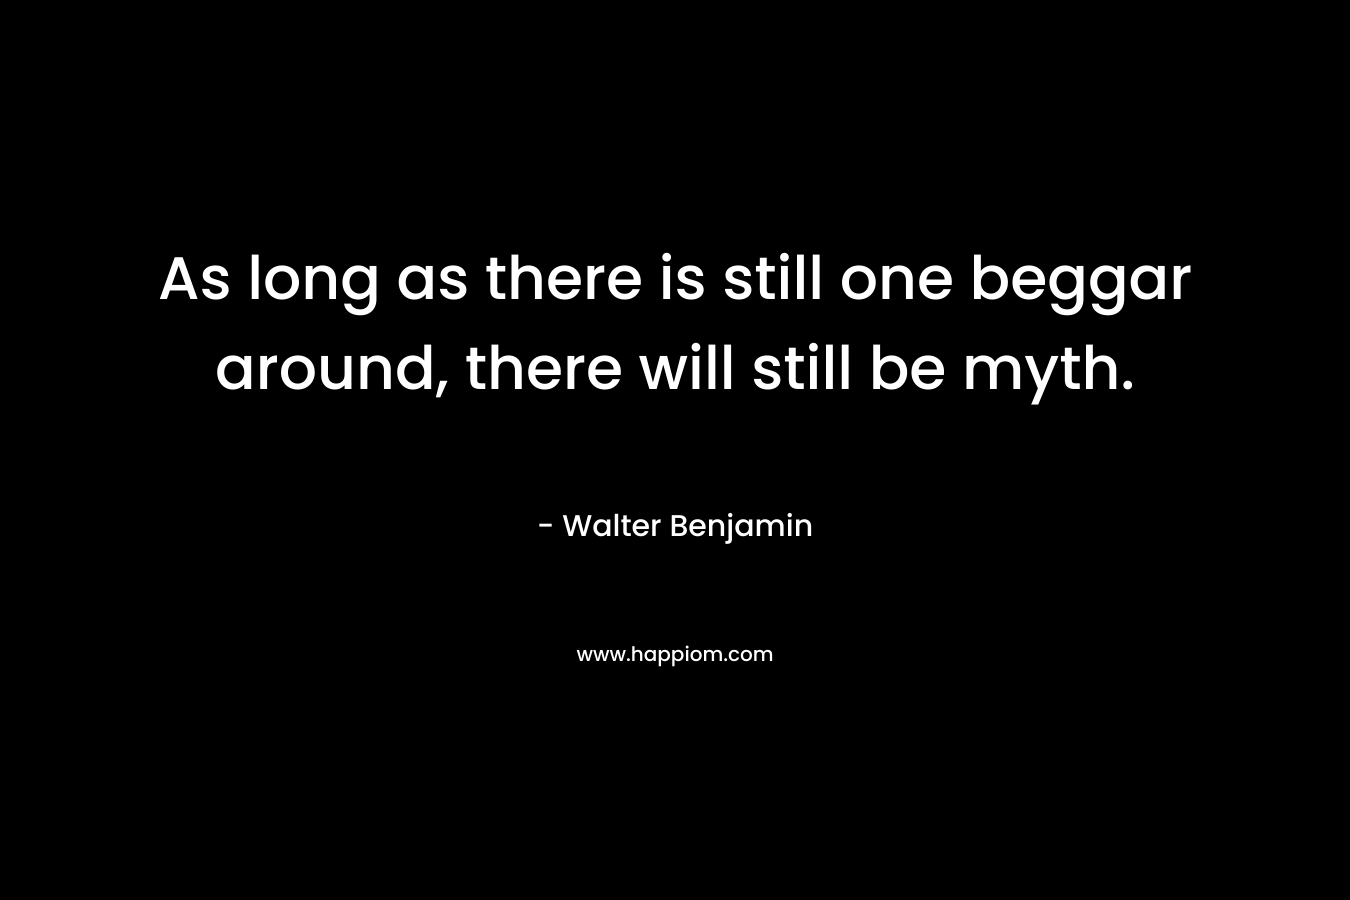 As long as there is still one beggar around, there will still be myth. – Walter Benjamin